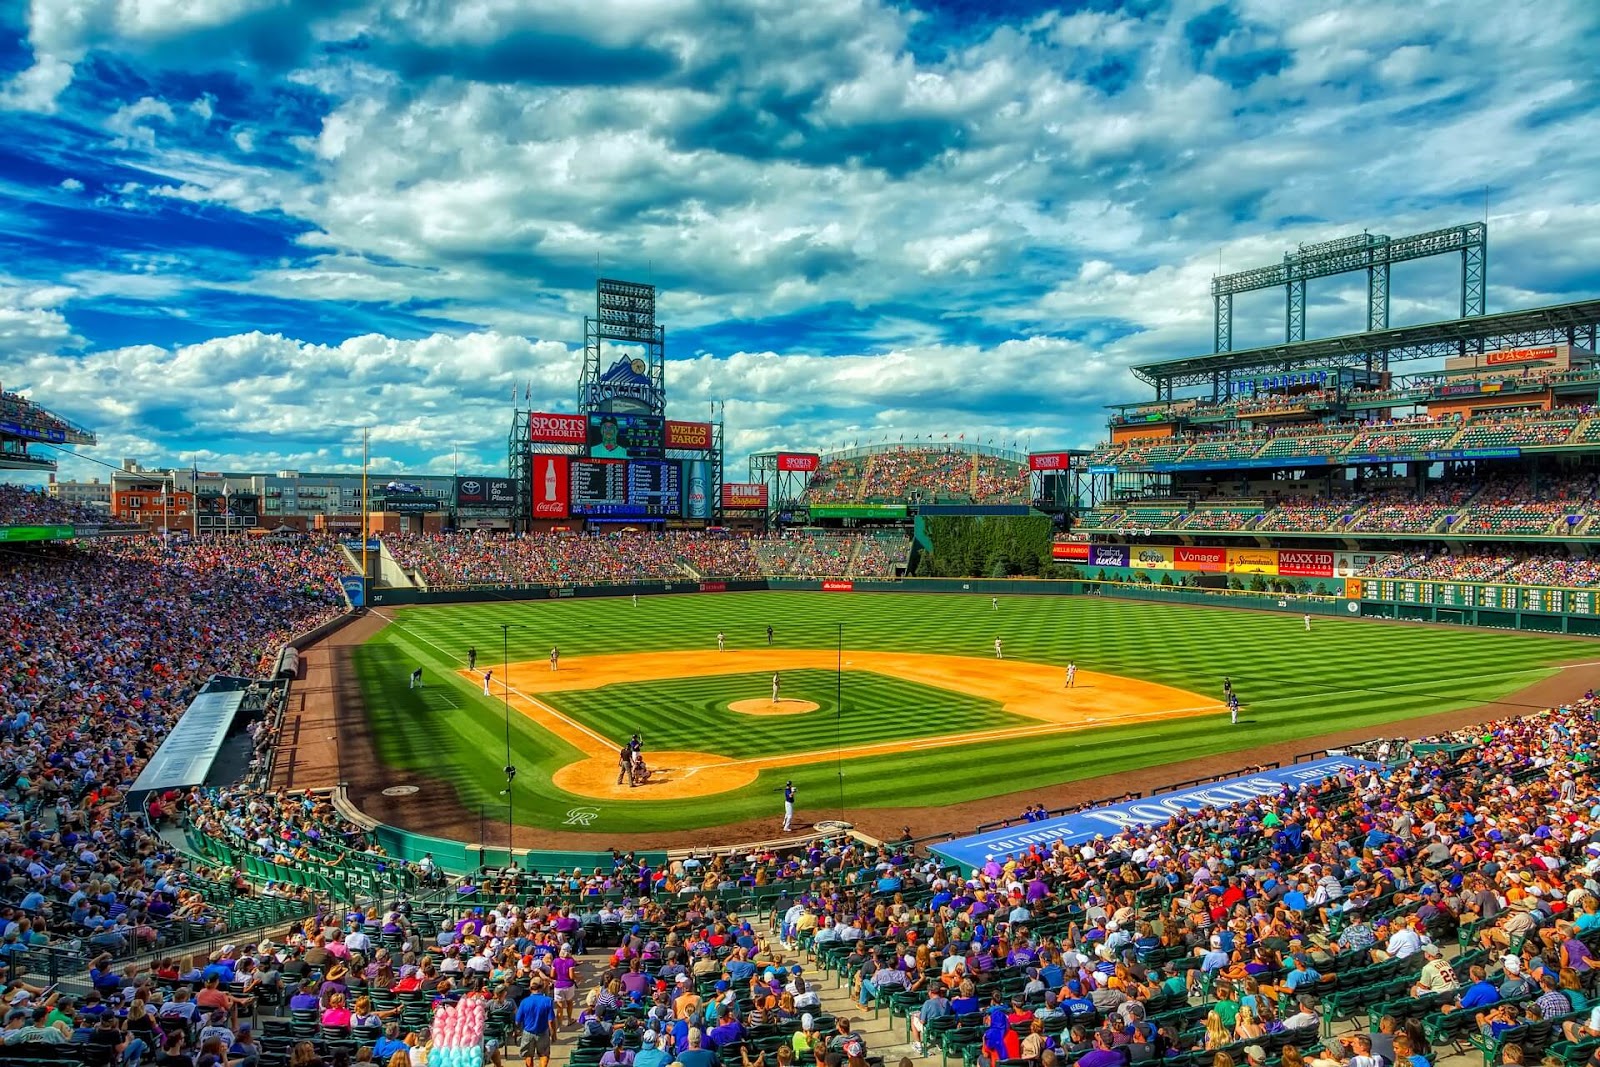 Colorado Rockies playing baseball at Coors Field during summer in Denver